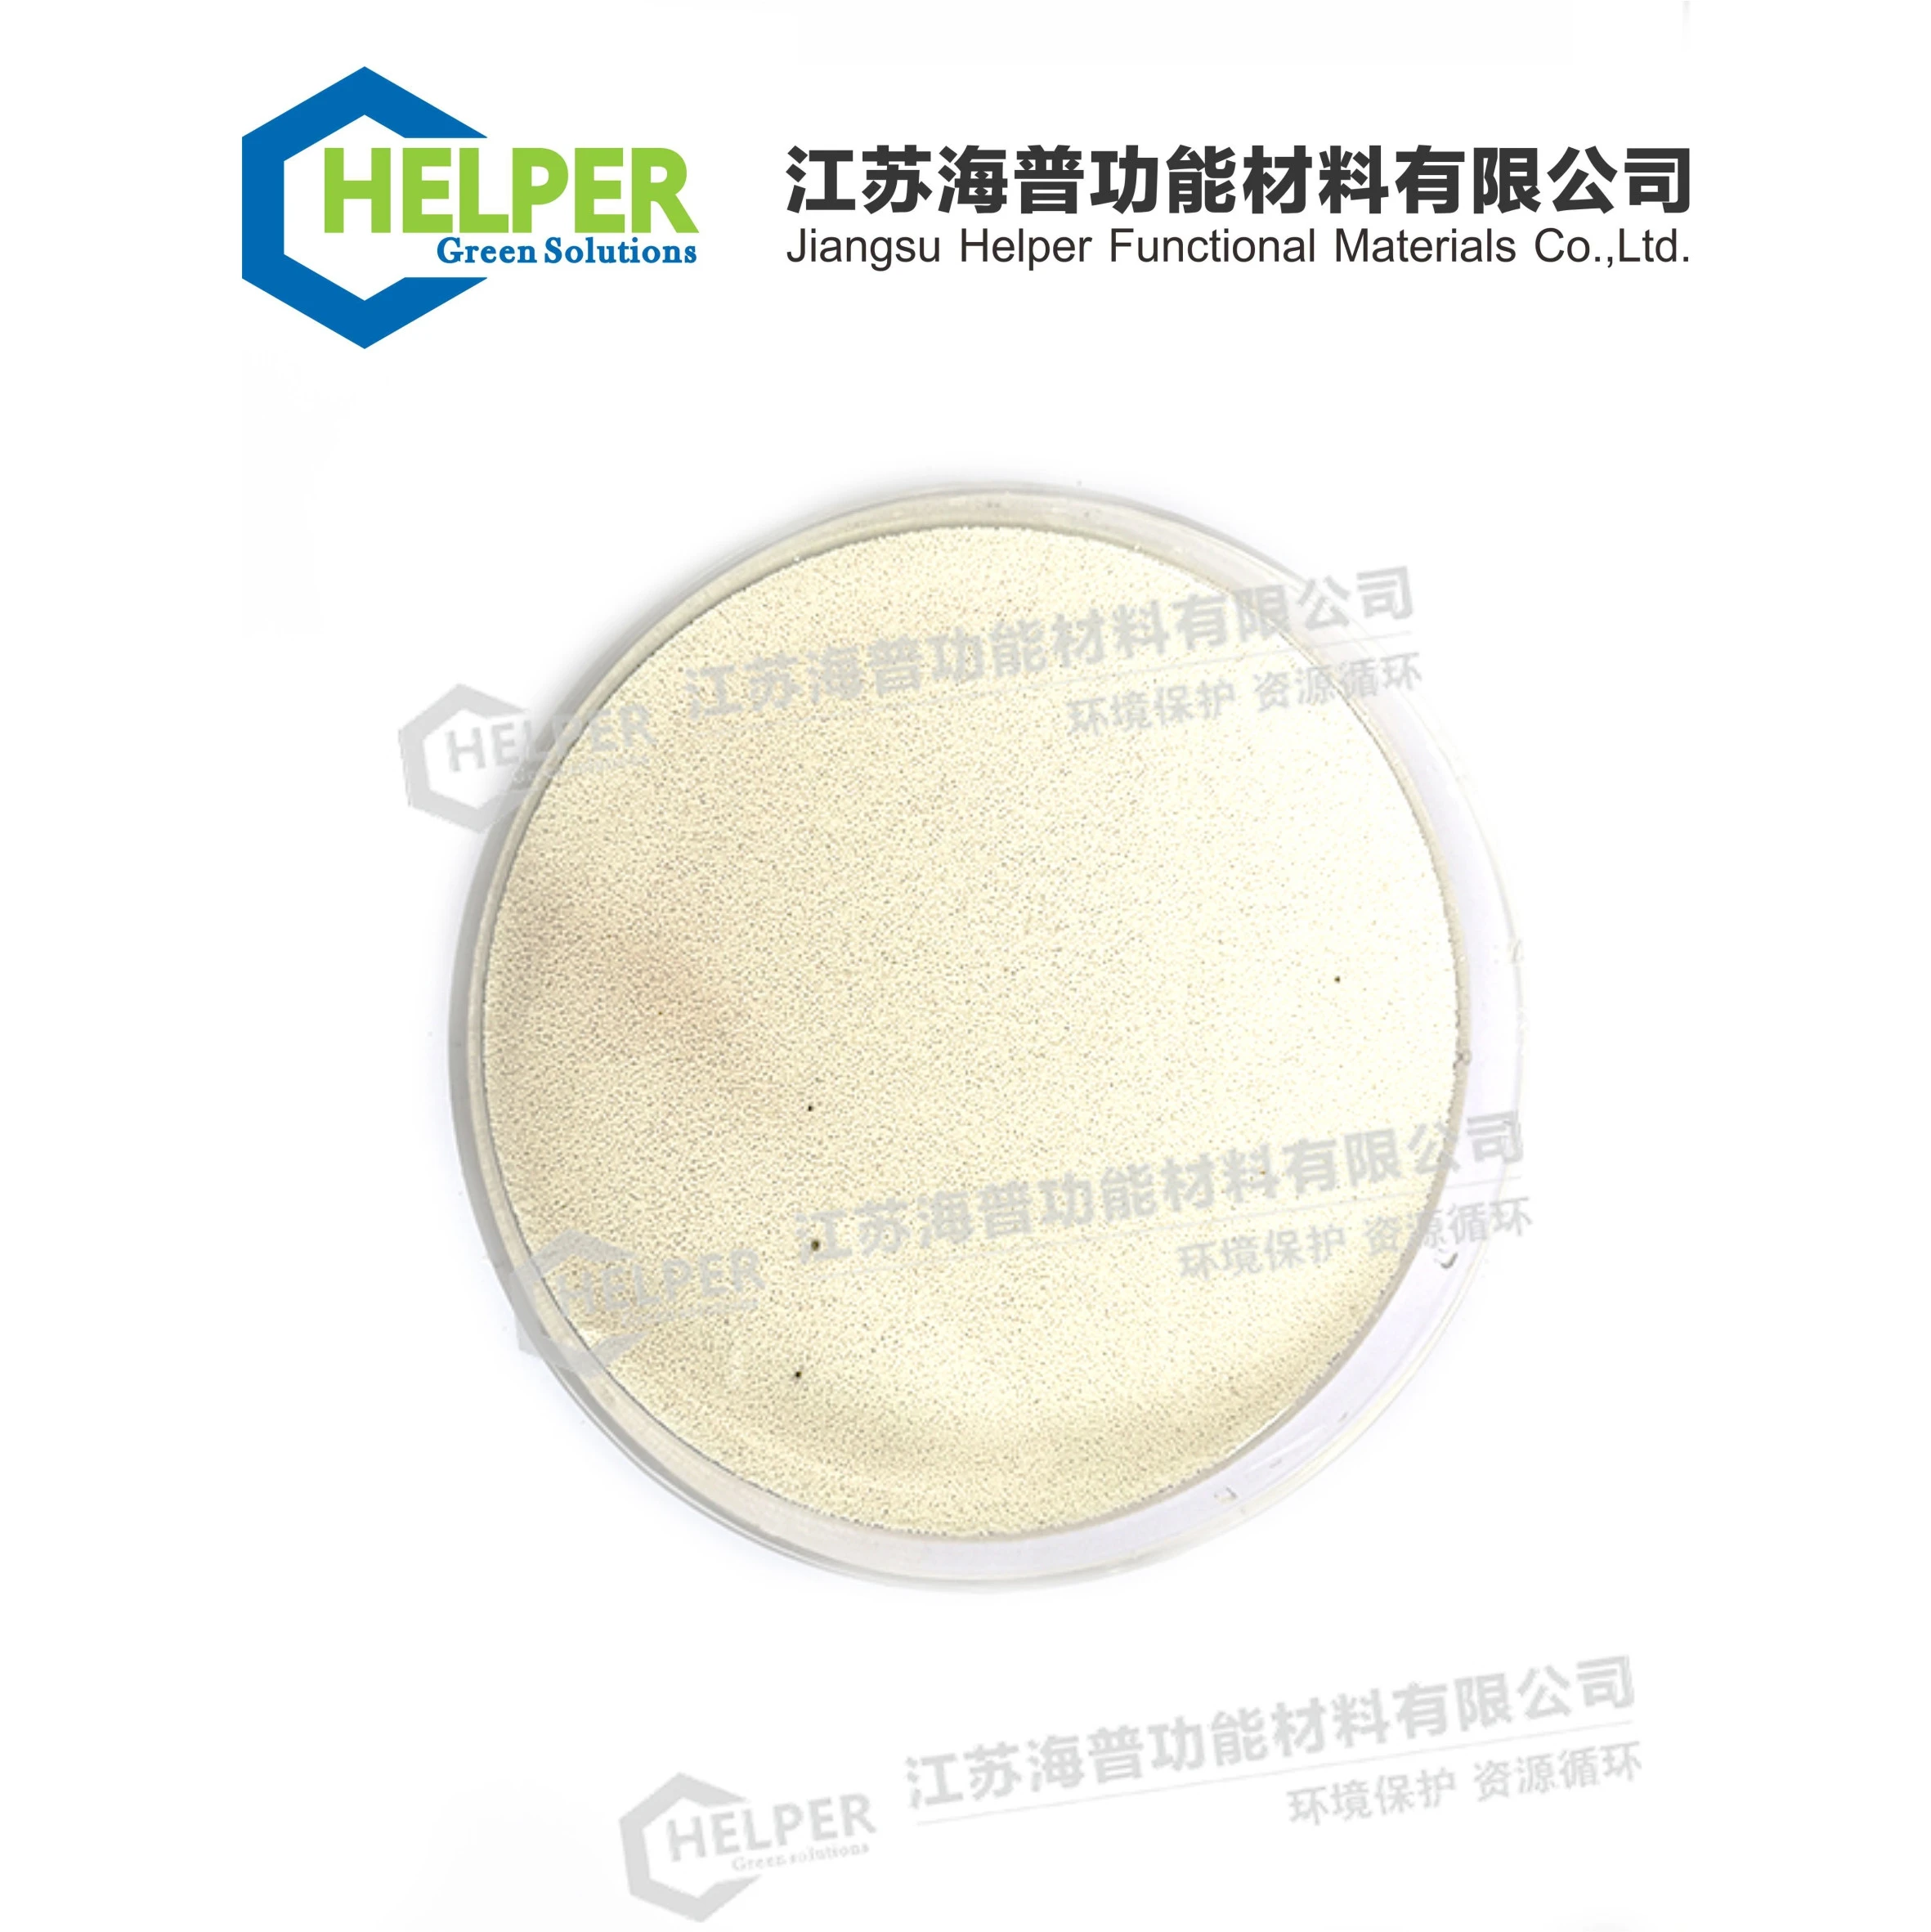 CHEMICAL ION EXCHANGE RESIN HP1010 OIL GREASE REMOVAL OIL ADSORBENT BEAD RESIN MOLECULAR SIEVE